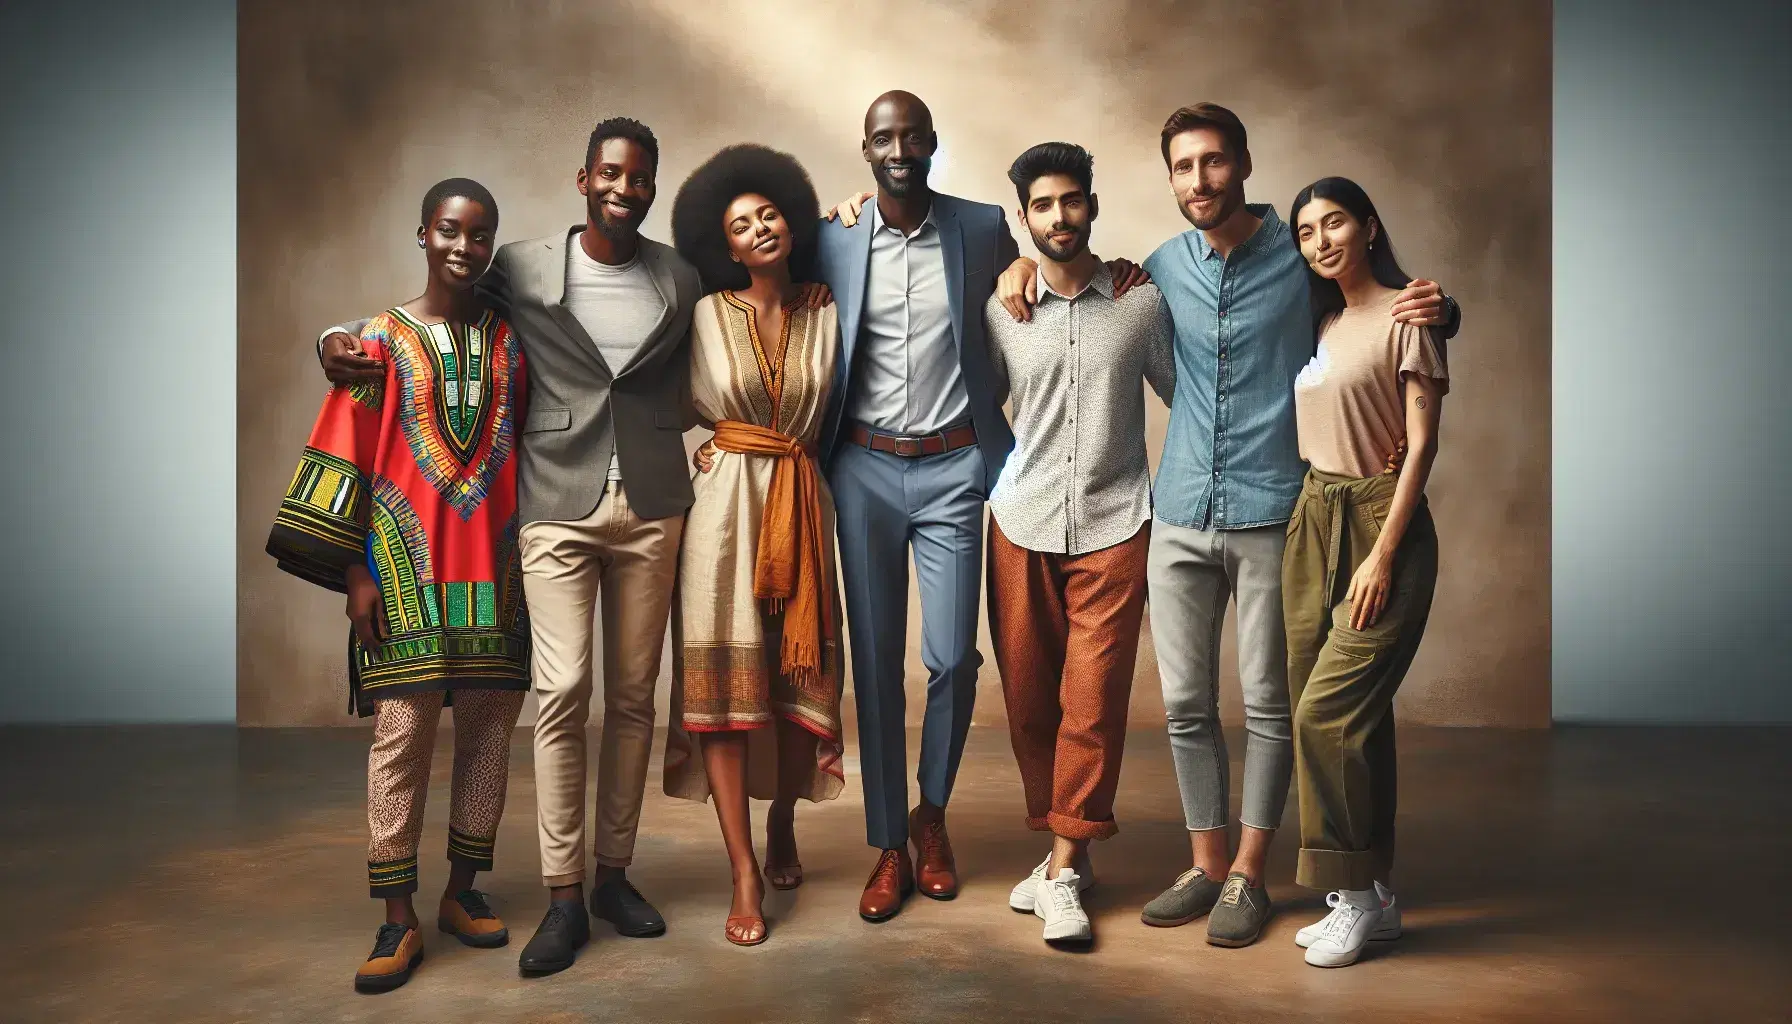 Multi-ethnic group of six people in semi-circle with various clothing, expressing unity and belonging on neutral background.